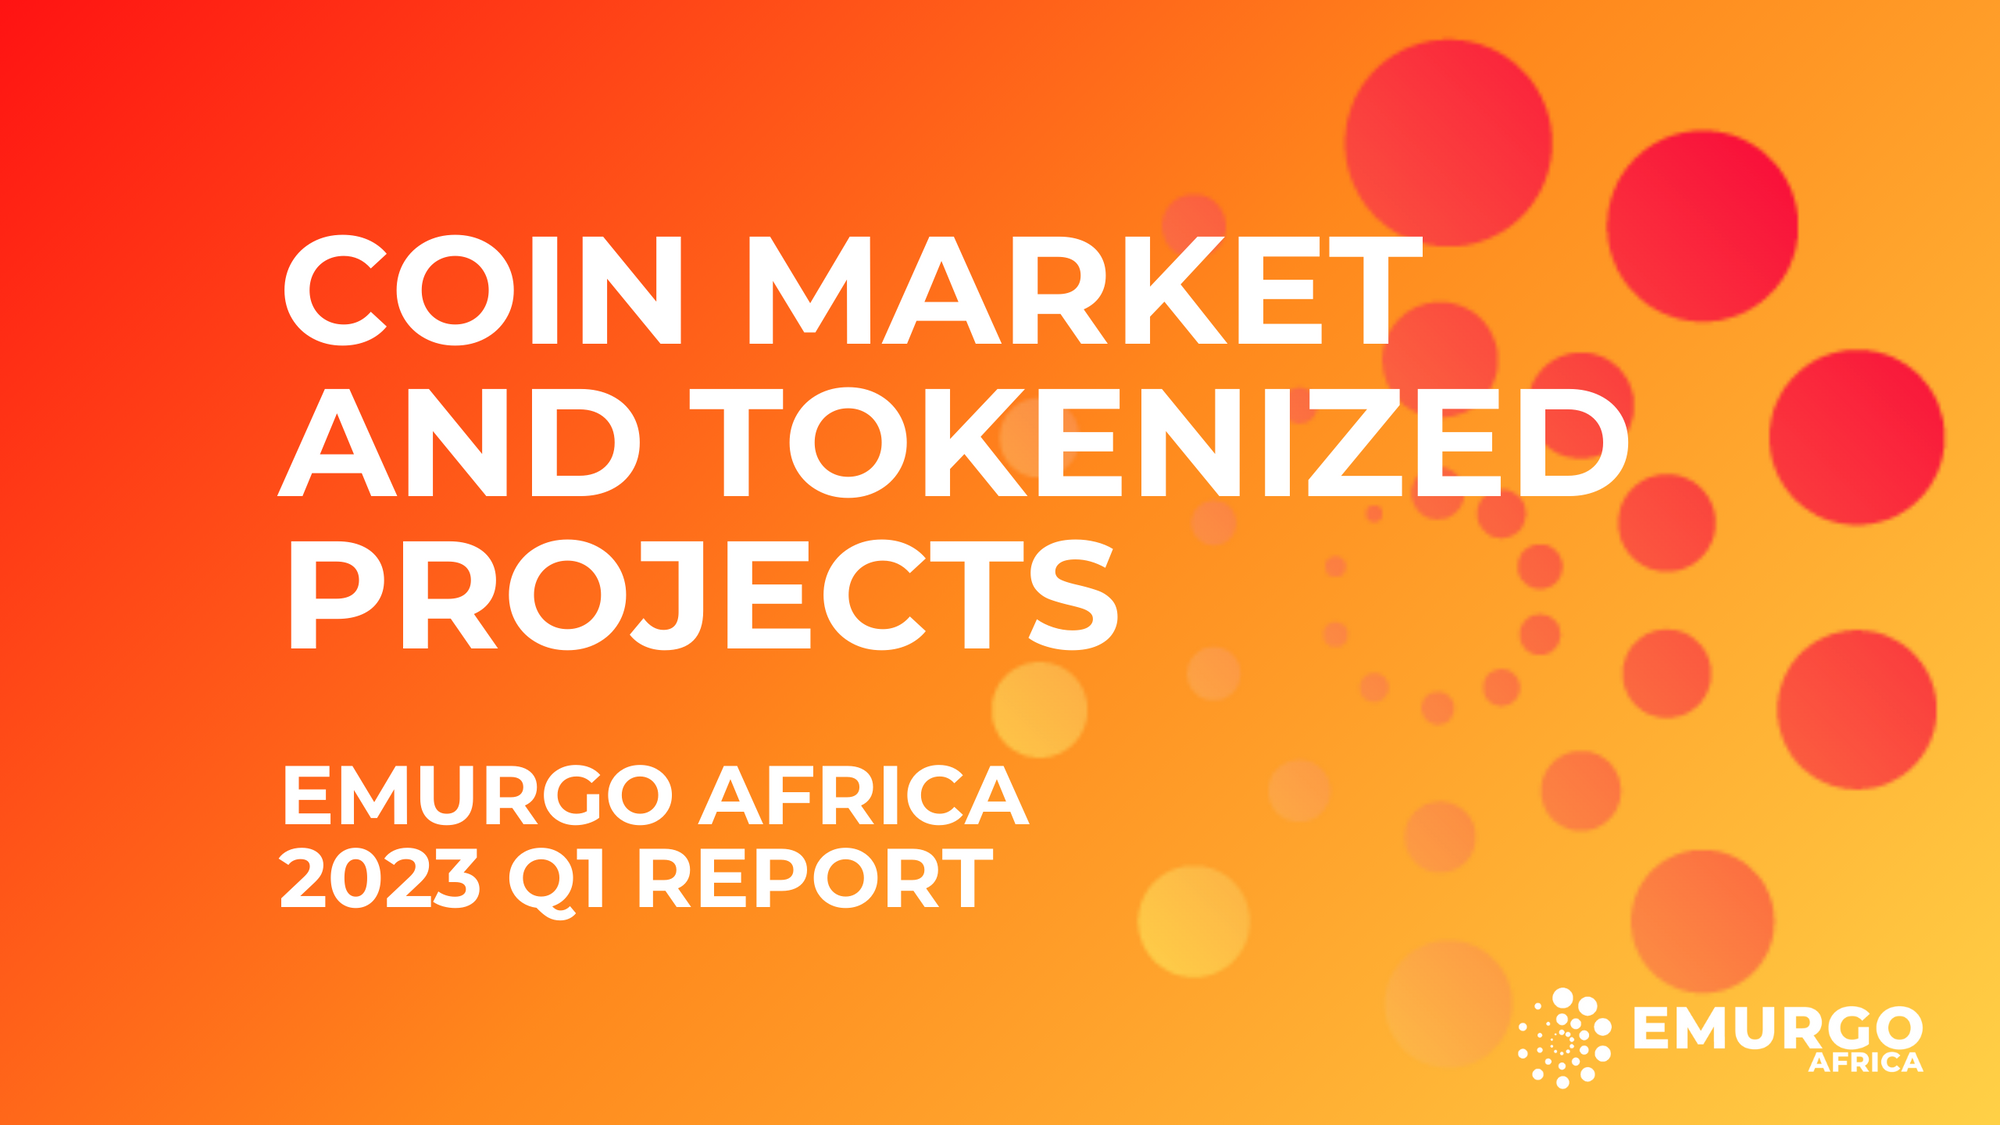 EMURGO Africa 2023 Q1 Report: Coin Market and Tokenized Projects